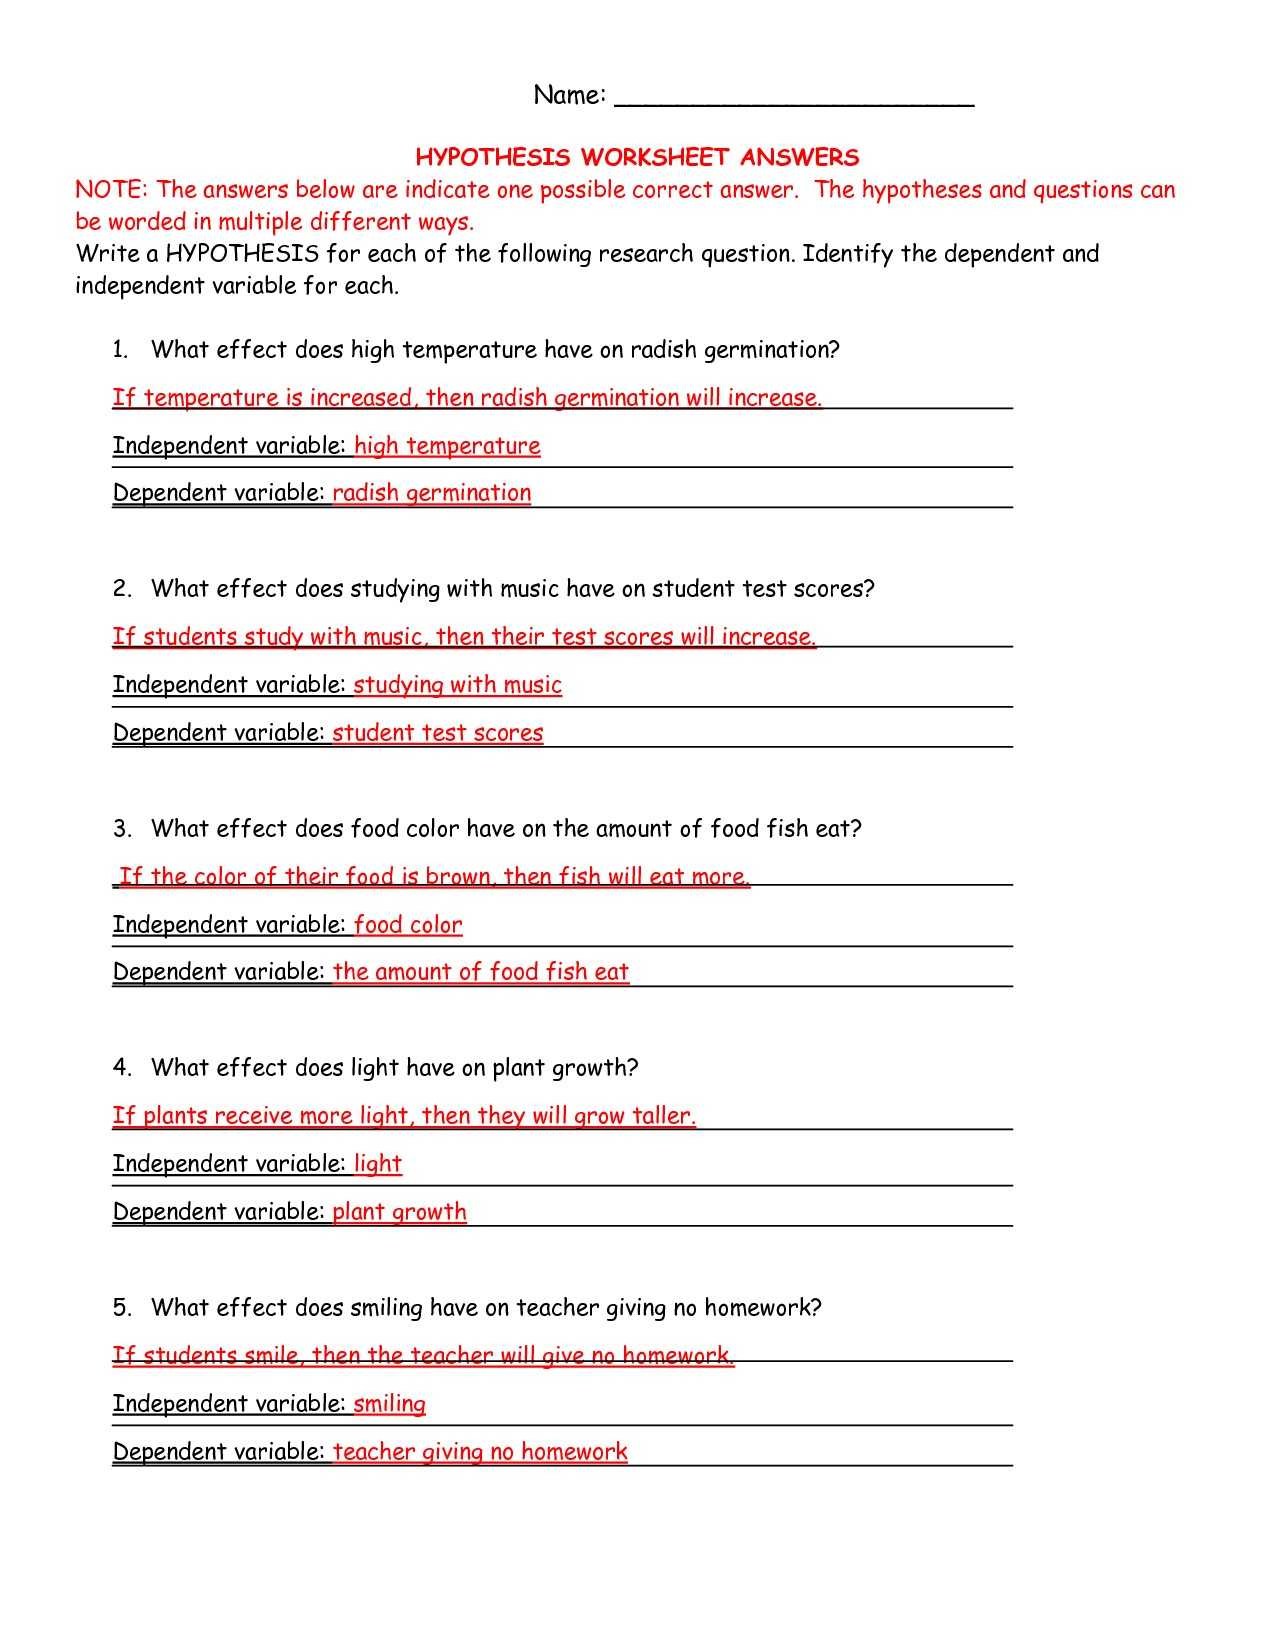 Mcgraw Hill Networks World History and Geography Worksheet Answers as Well as 28 Best S Introduction to the Scientific Method Worksheet